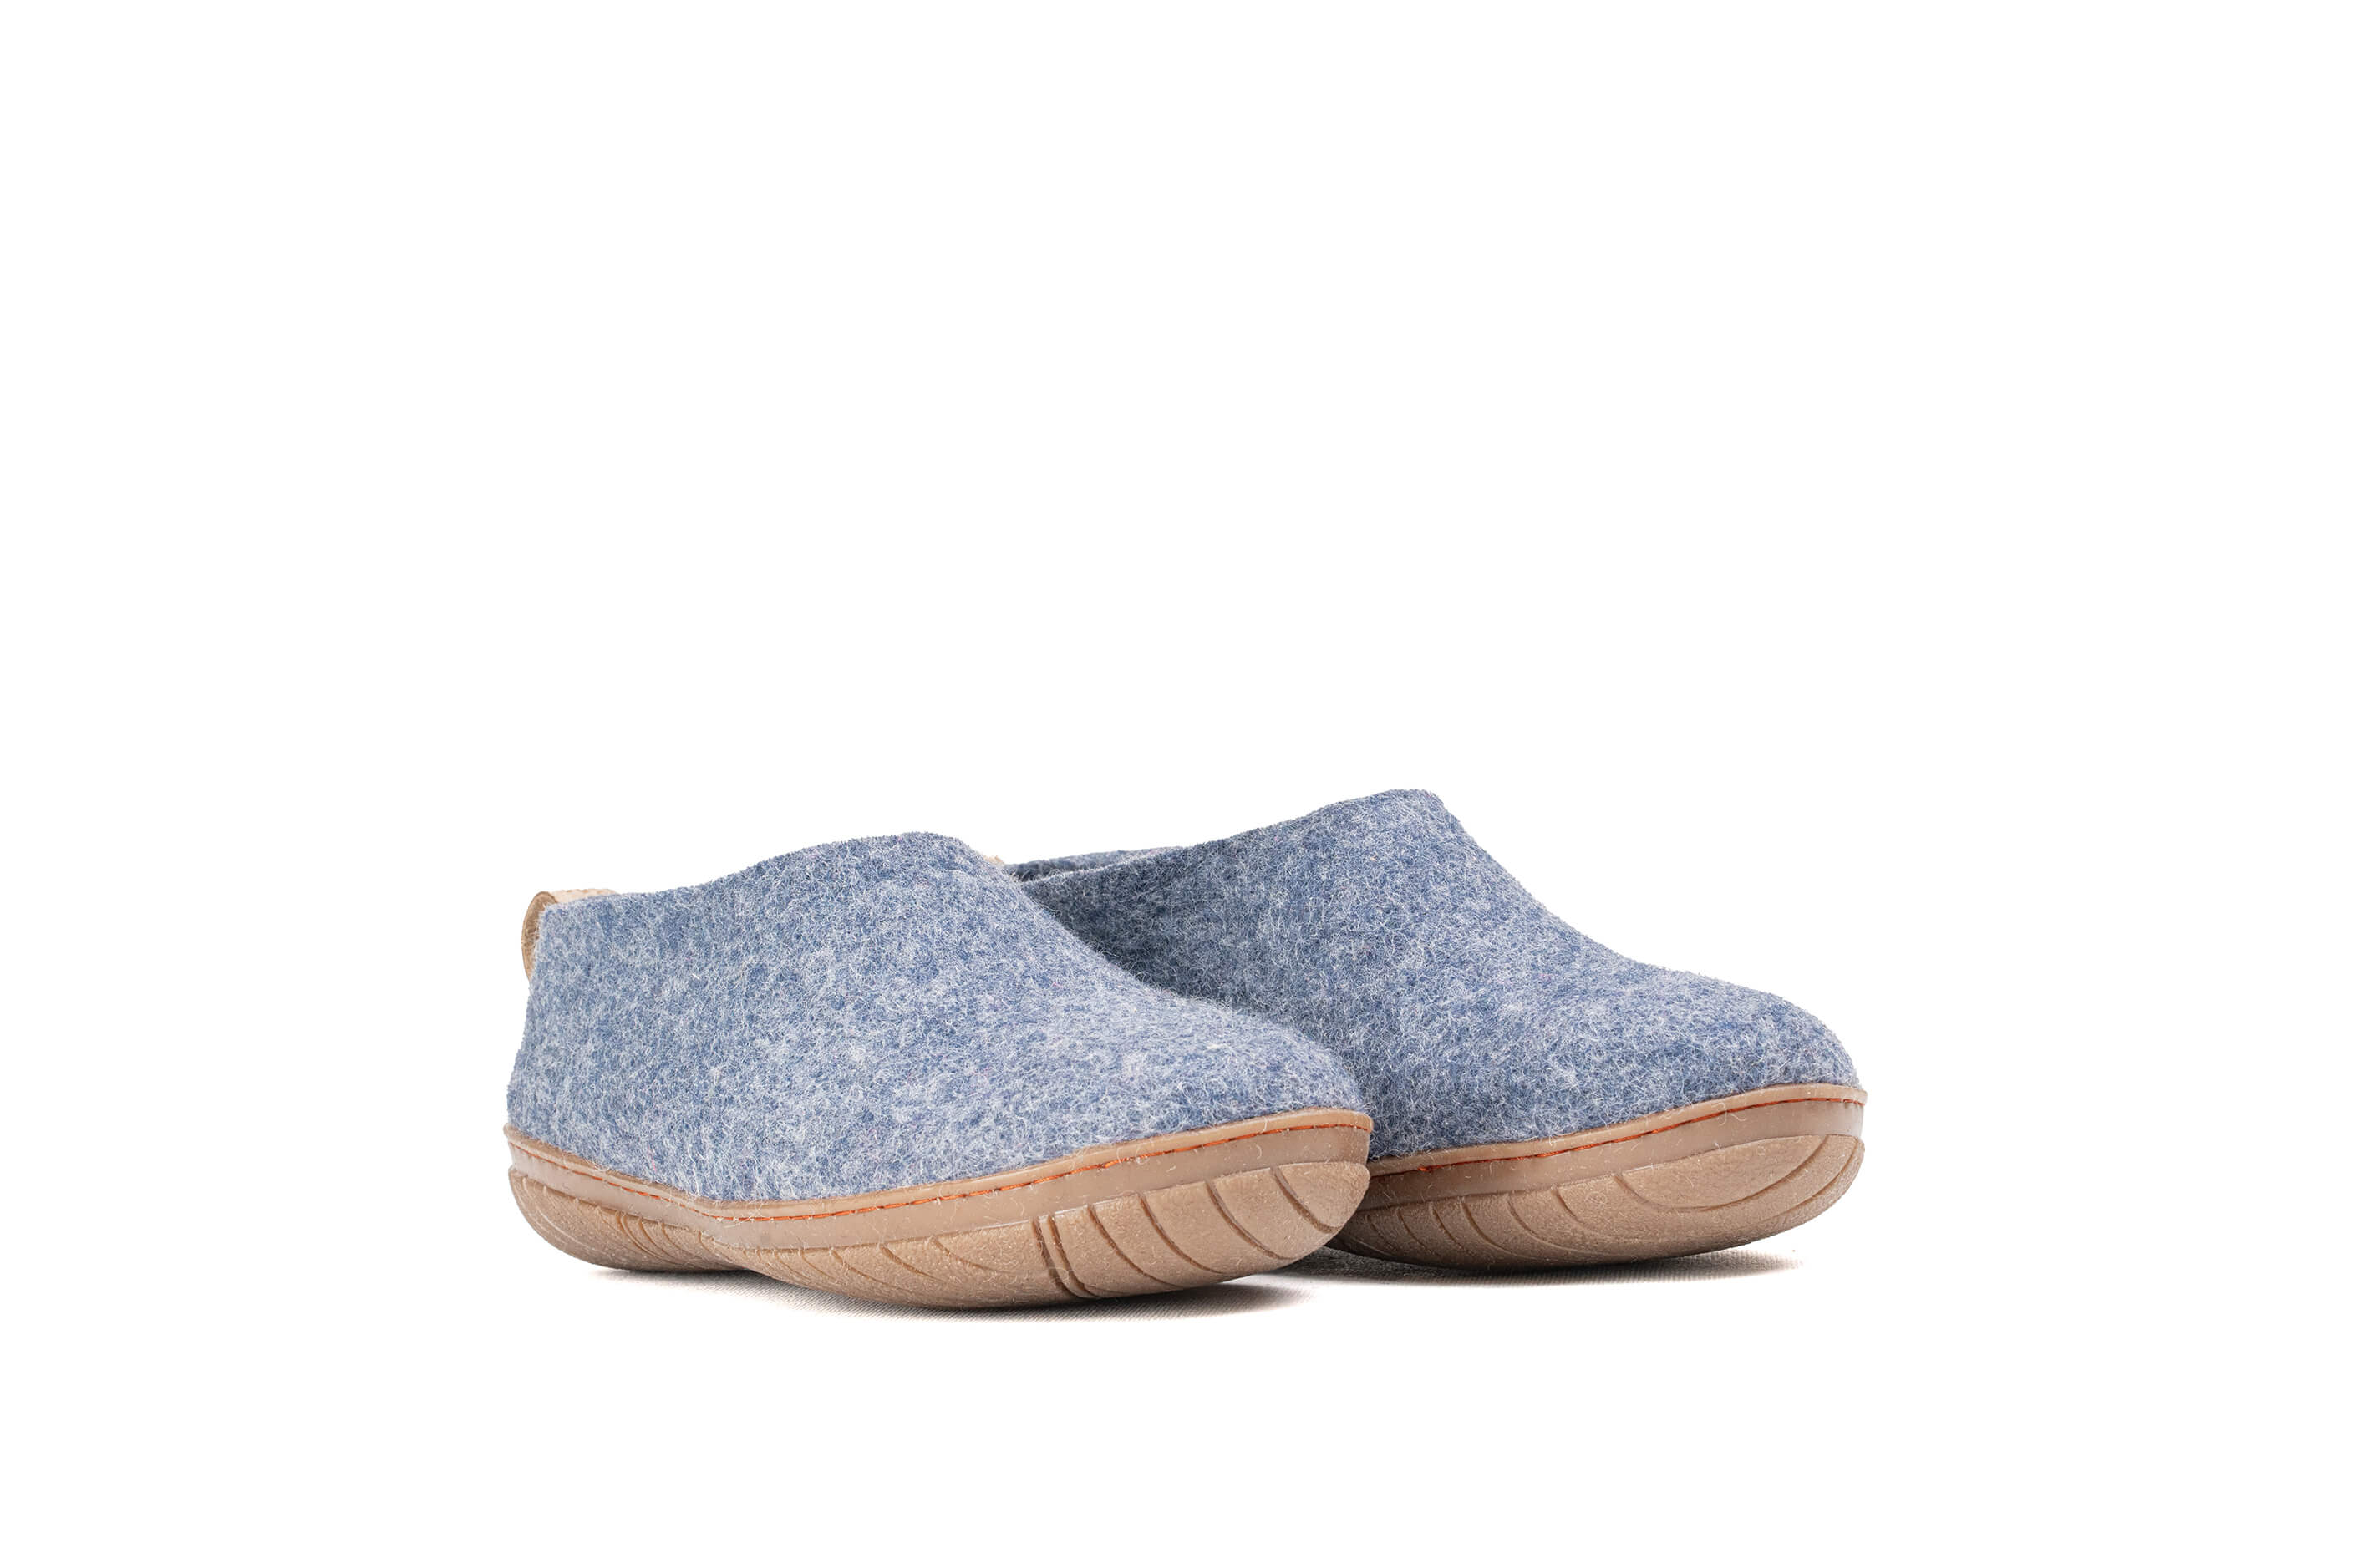 Stylish Outdoor Handmade Felt Shoes With Rubber Sole - Denim